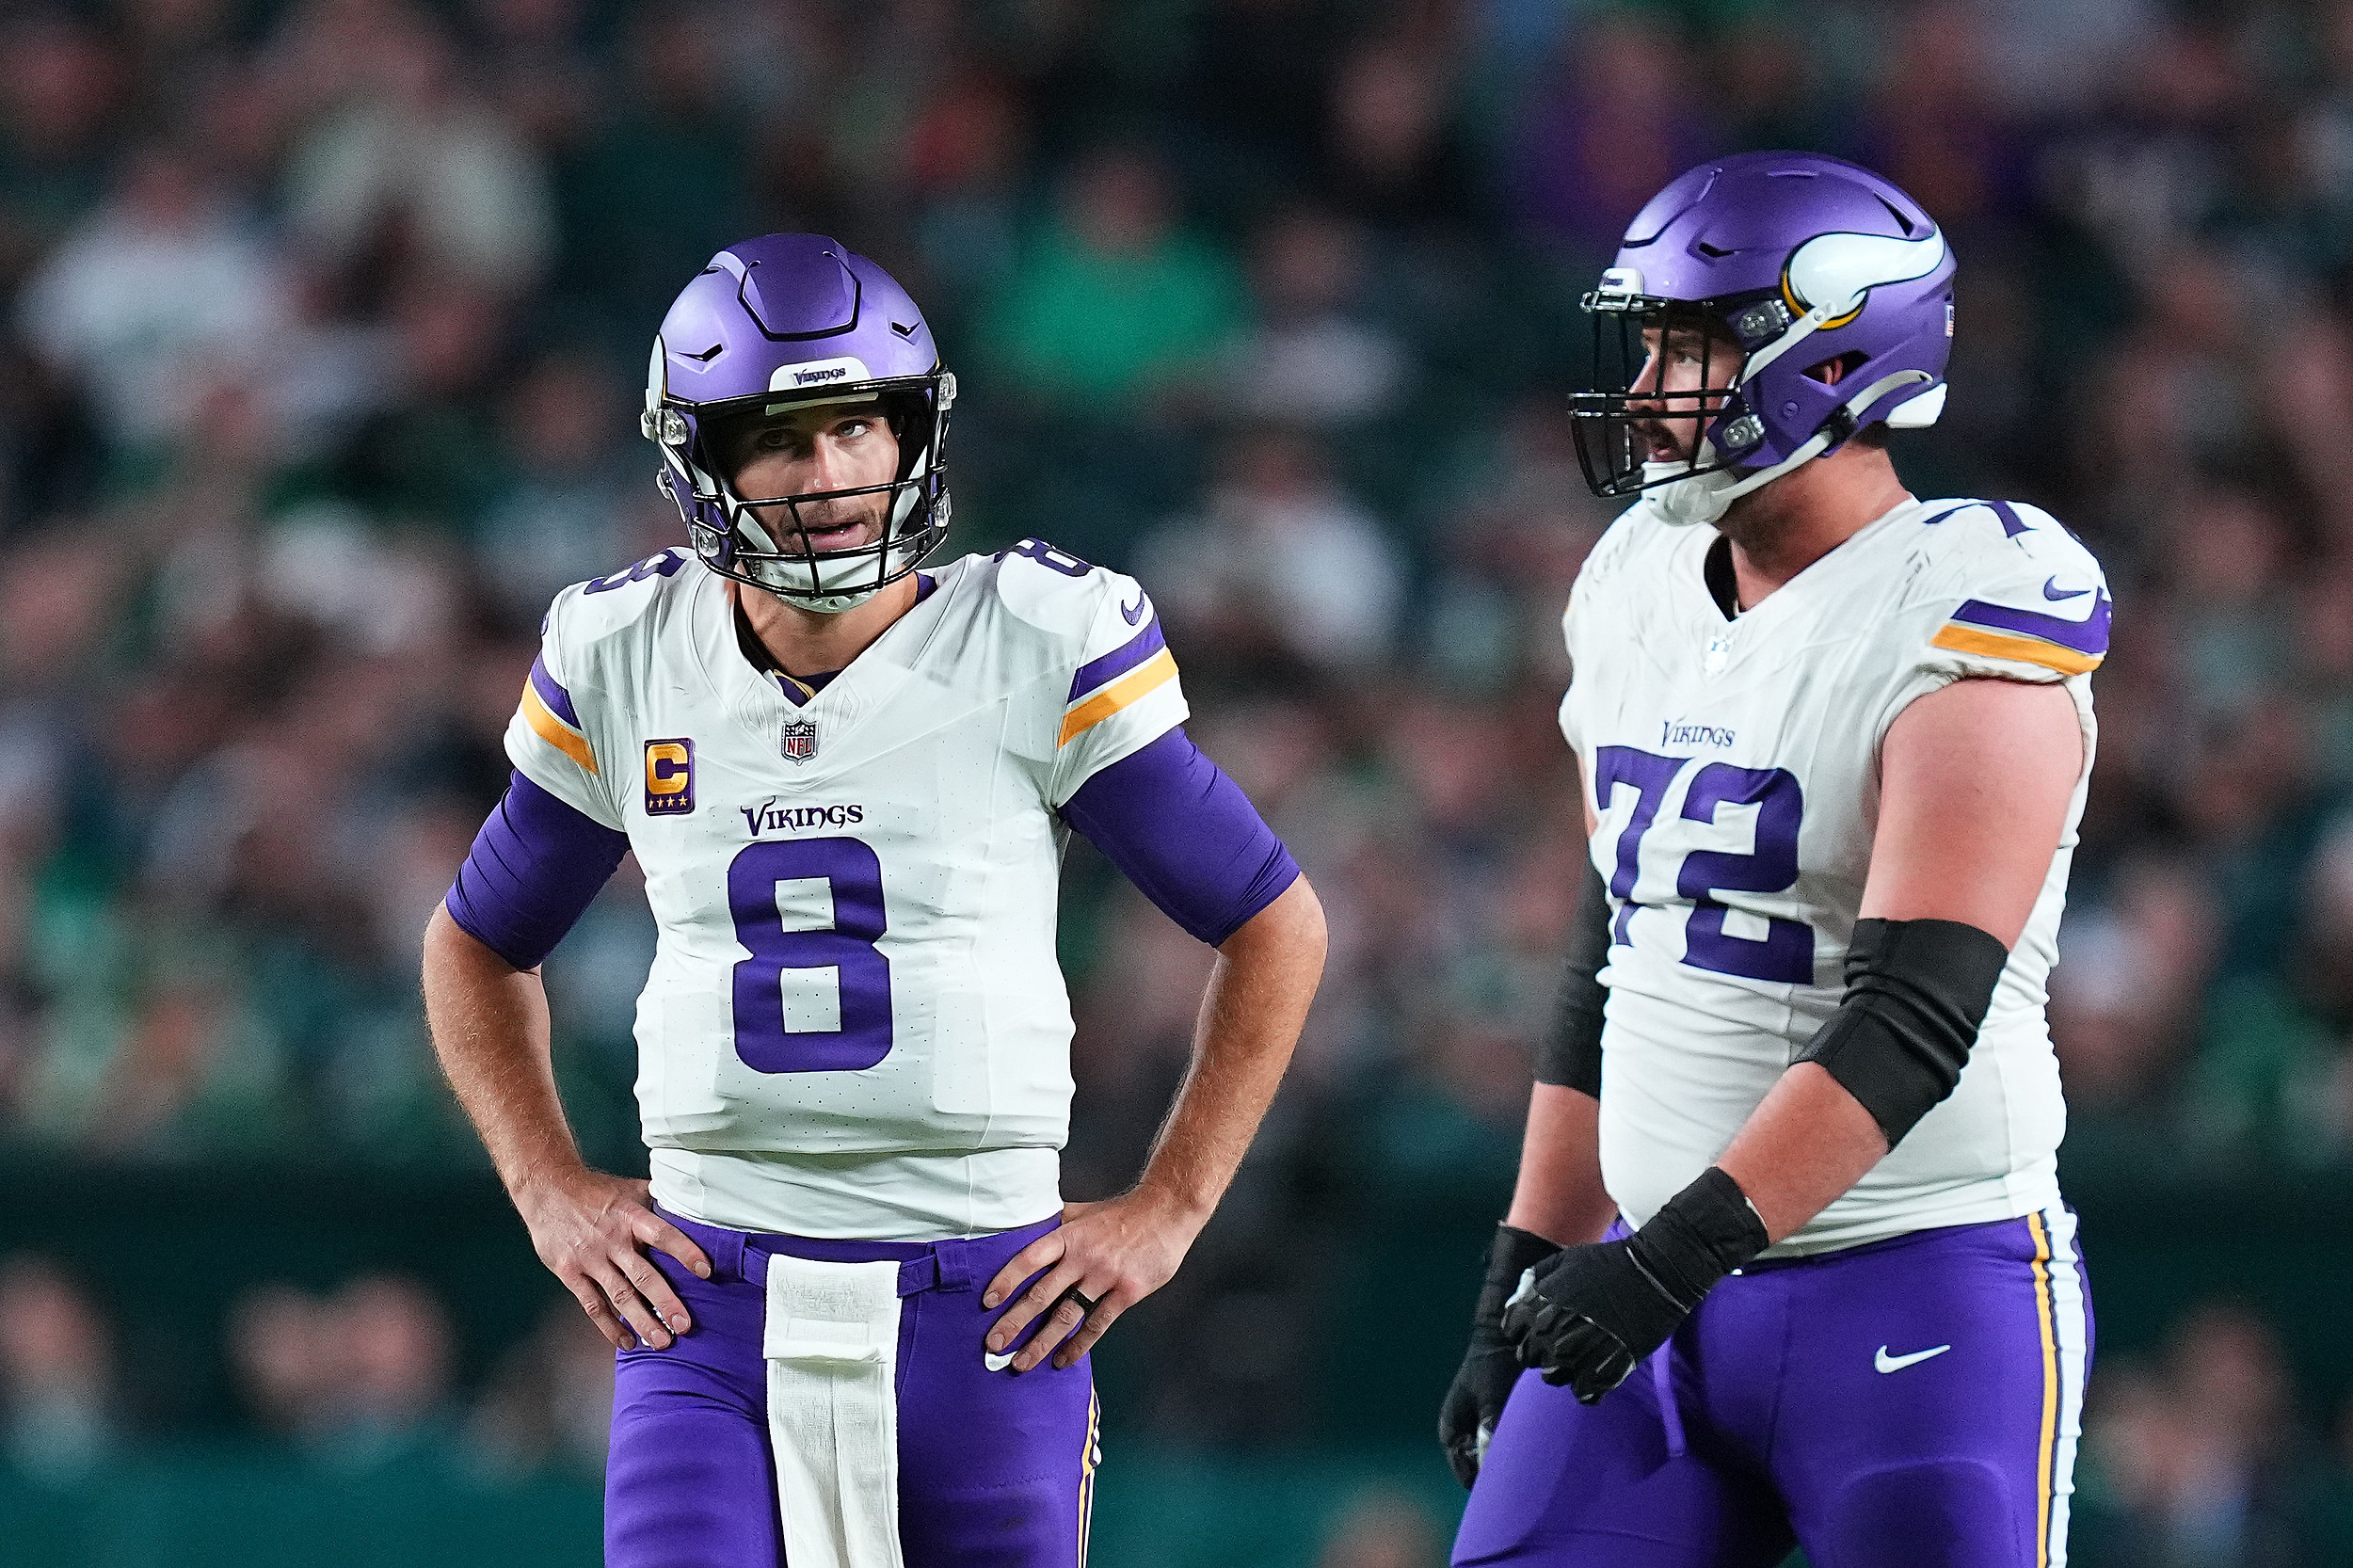 What Are The Vikings Odds Of Making Playoffs If They Start 0-2?